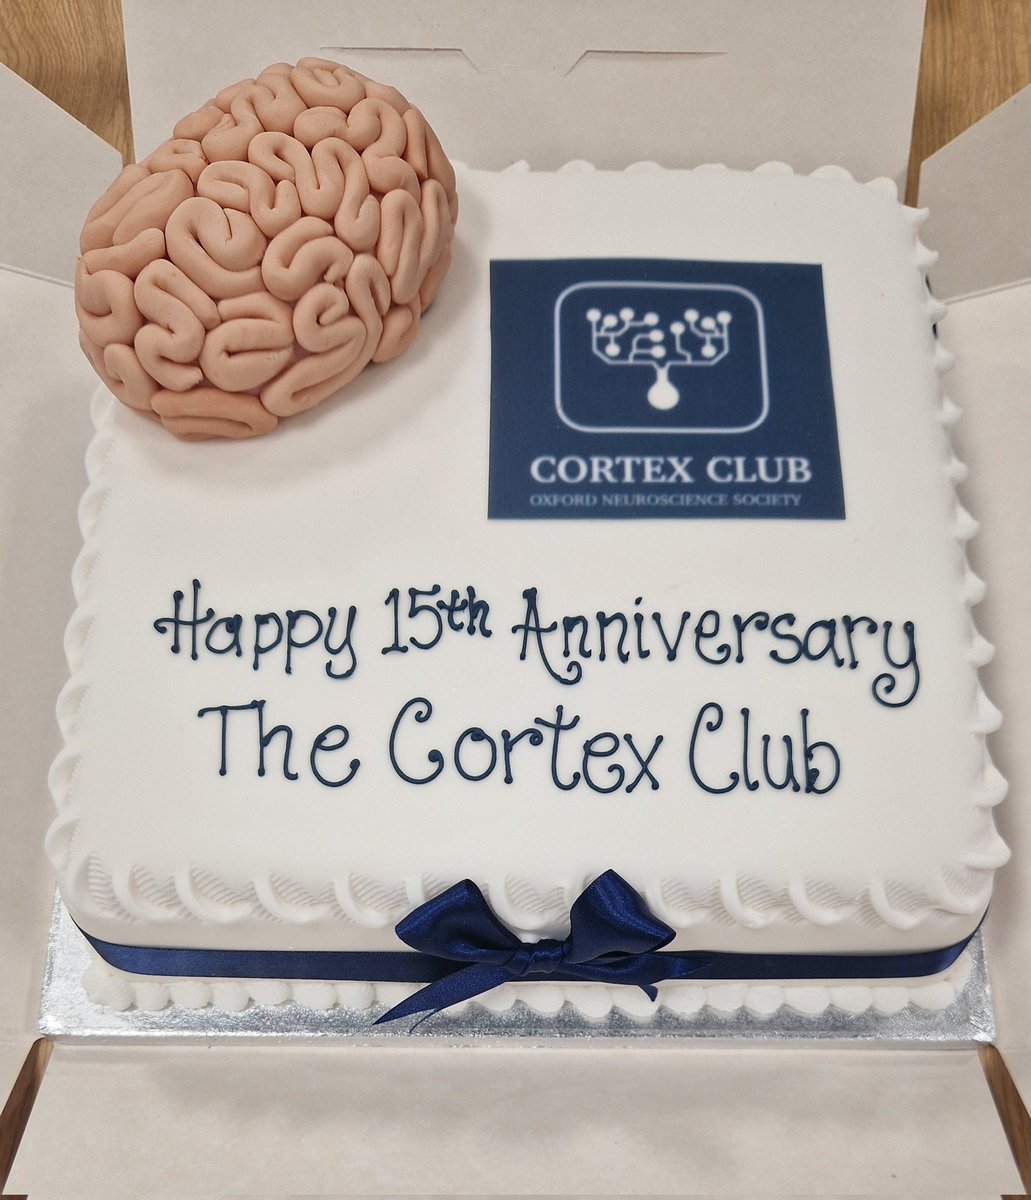 Happy 15th Birthday @CortexClub! Thanks @cjstagg @ZoltanMolnar64 @abhii_mit @KaetzelLab for the journey in the rich history of the Oxford Neuroscience Society, and the exciting paths and research of the founders....from strength to strength! @OxNeuro @PharmOxford @OxfordDPAG